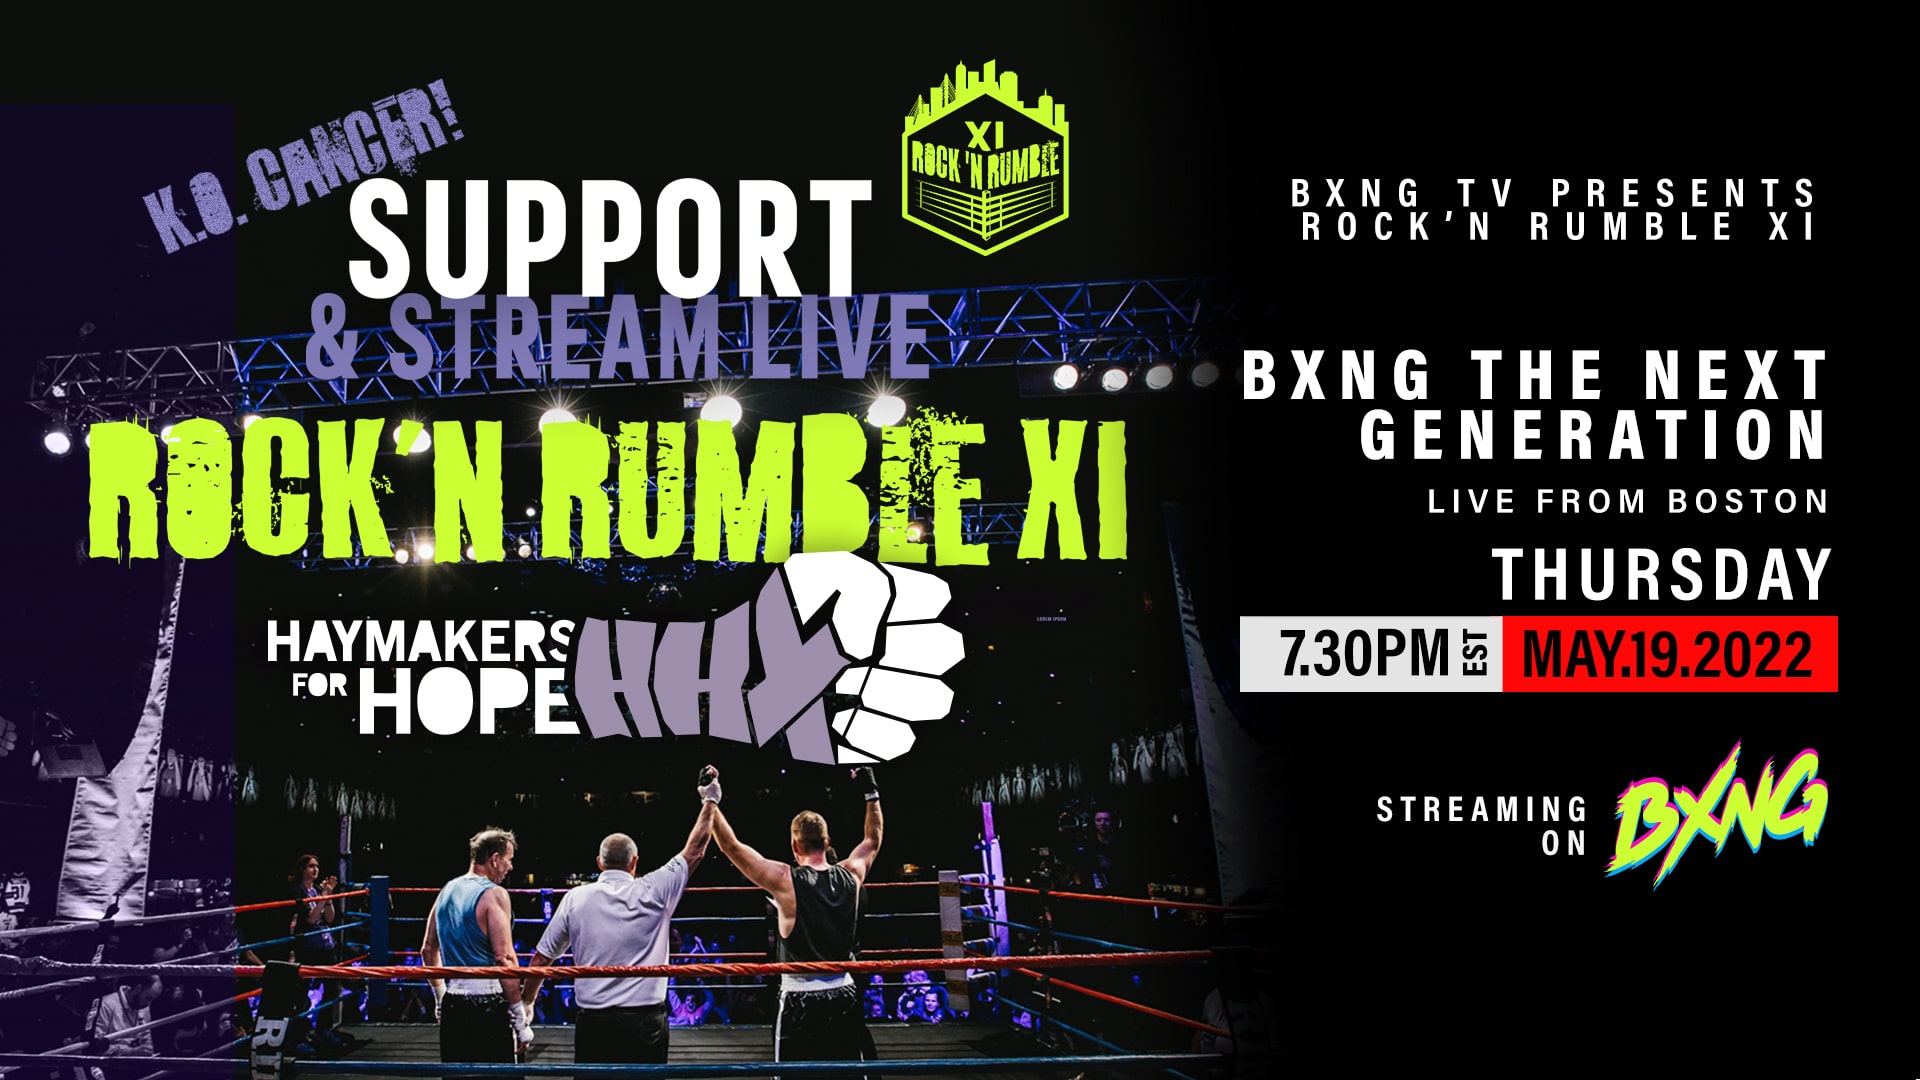 BXNG TV Presents Haymakers for Hope Event Live Stream 05/19/22 BXNG